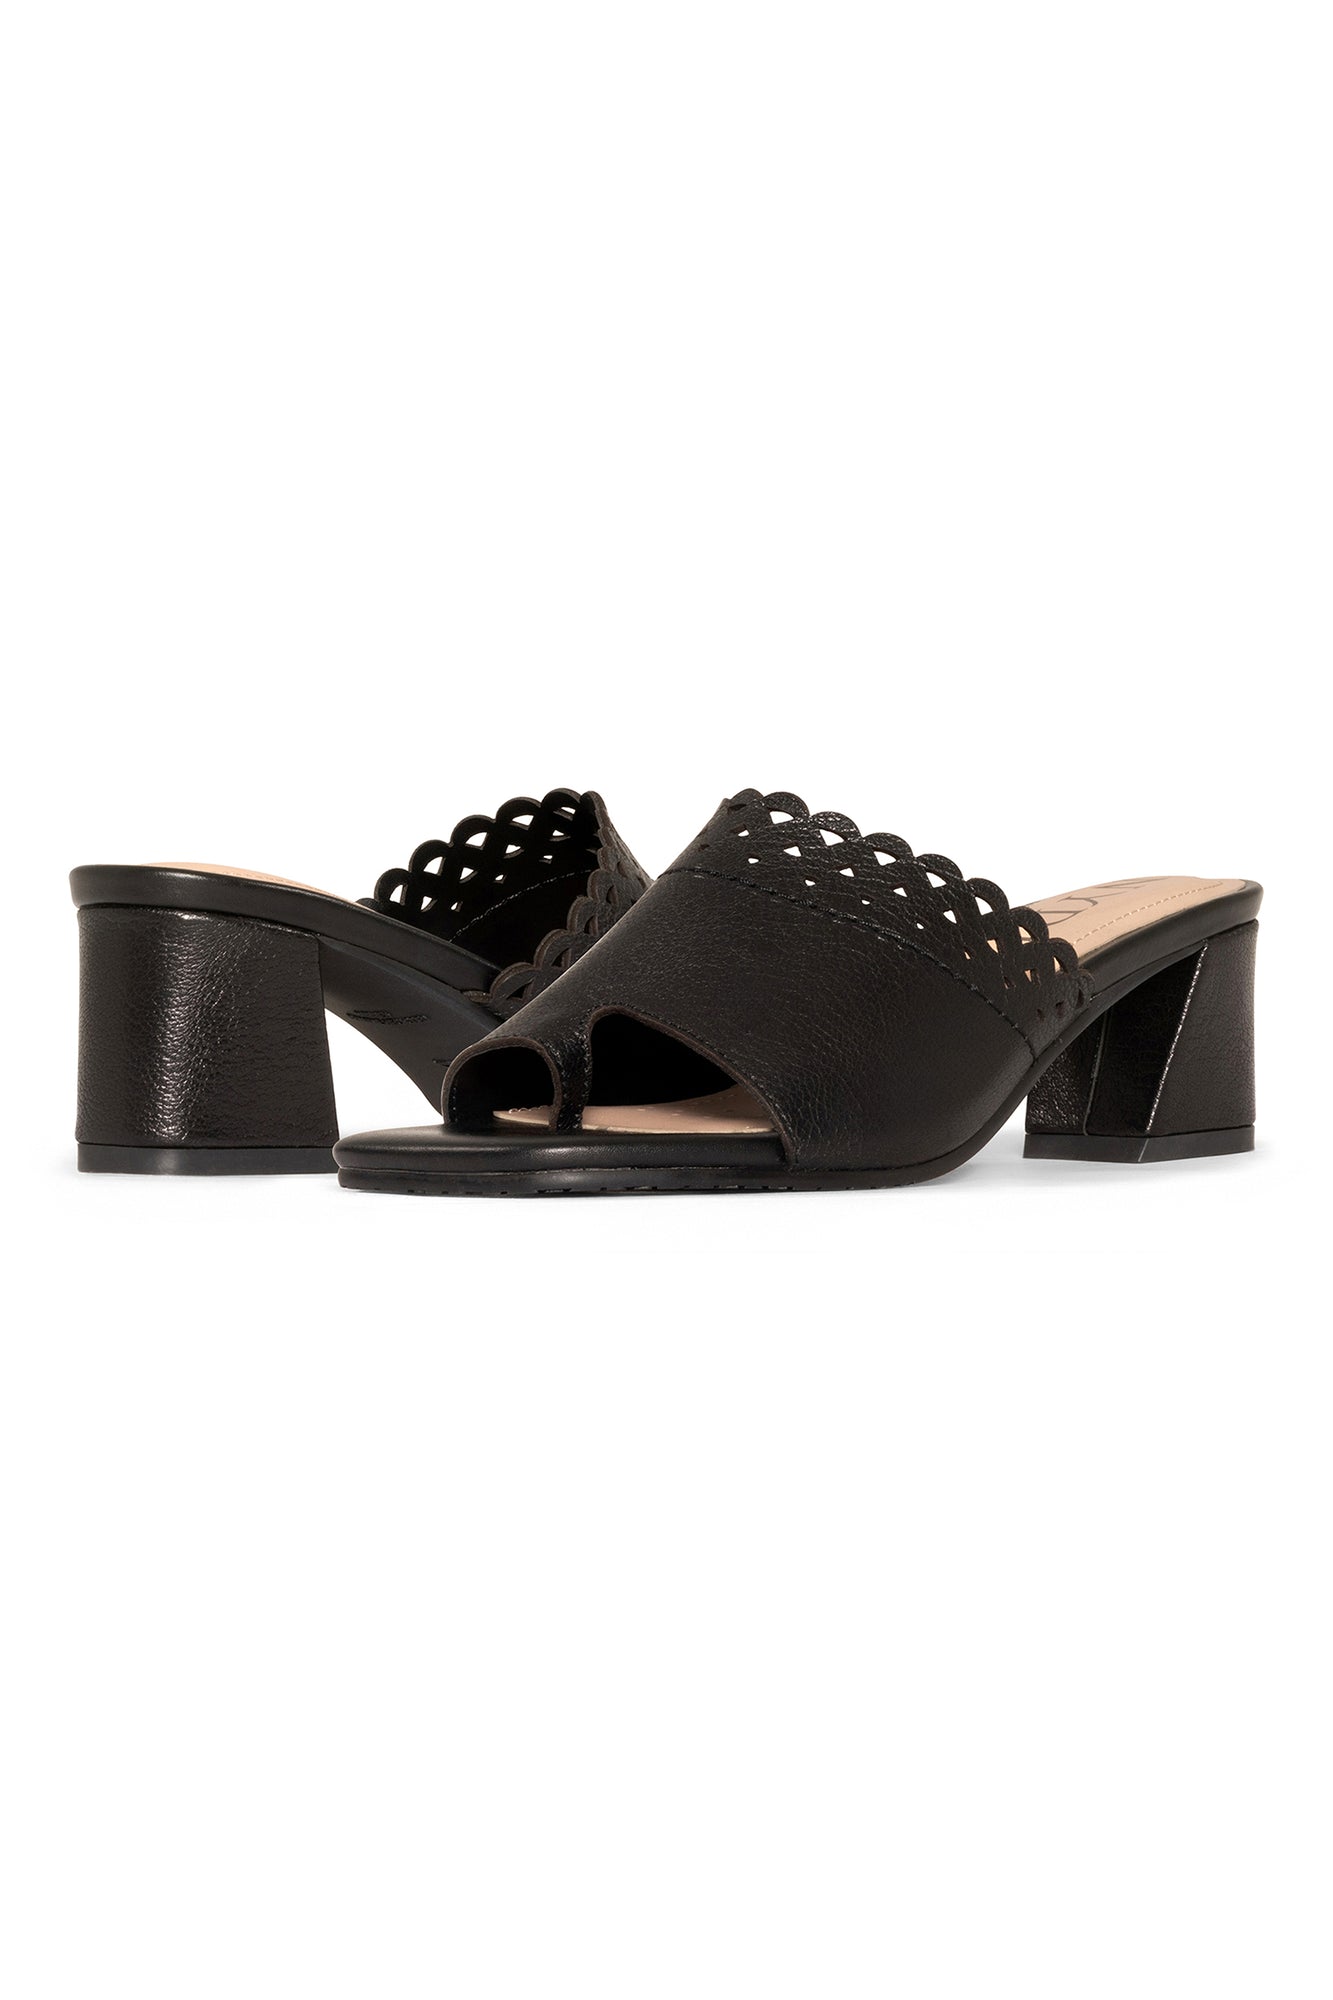 NYDJ Alanah Mule Sandals In Leather - Black